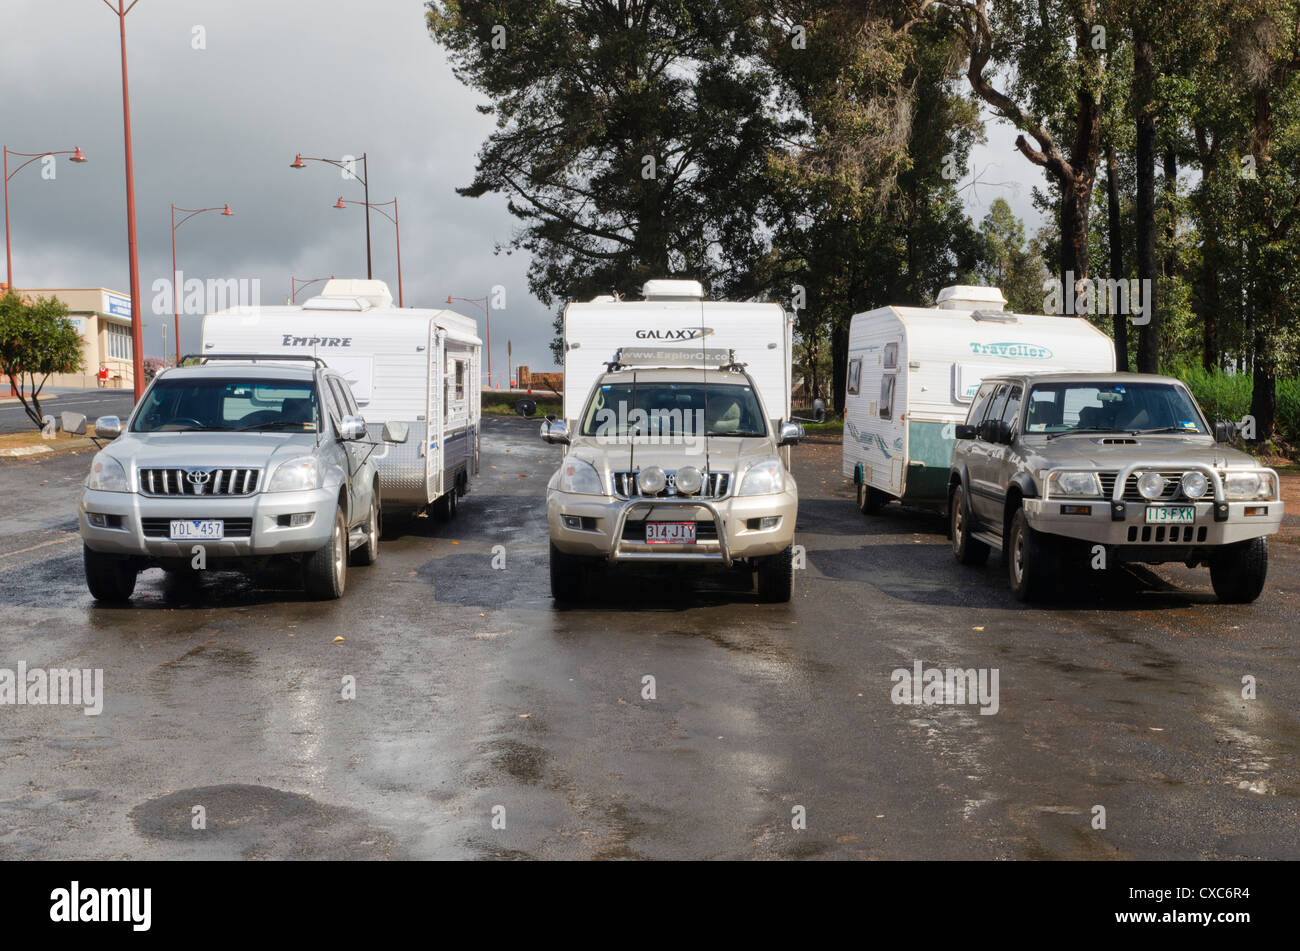 Three four-wheel drive vehicles towing caravans parked in the town of Pemberton, Western Australia Stock Photo